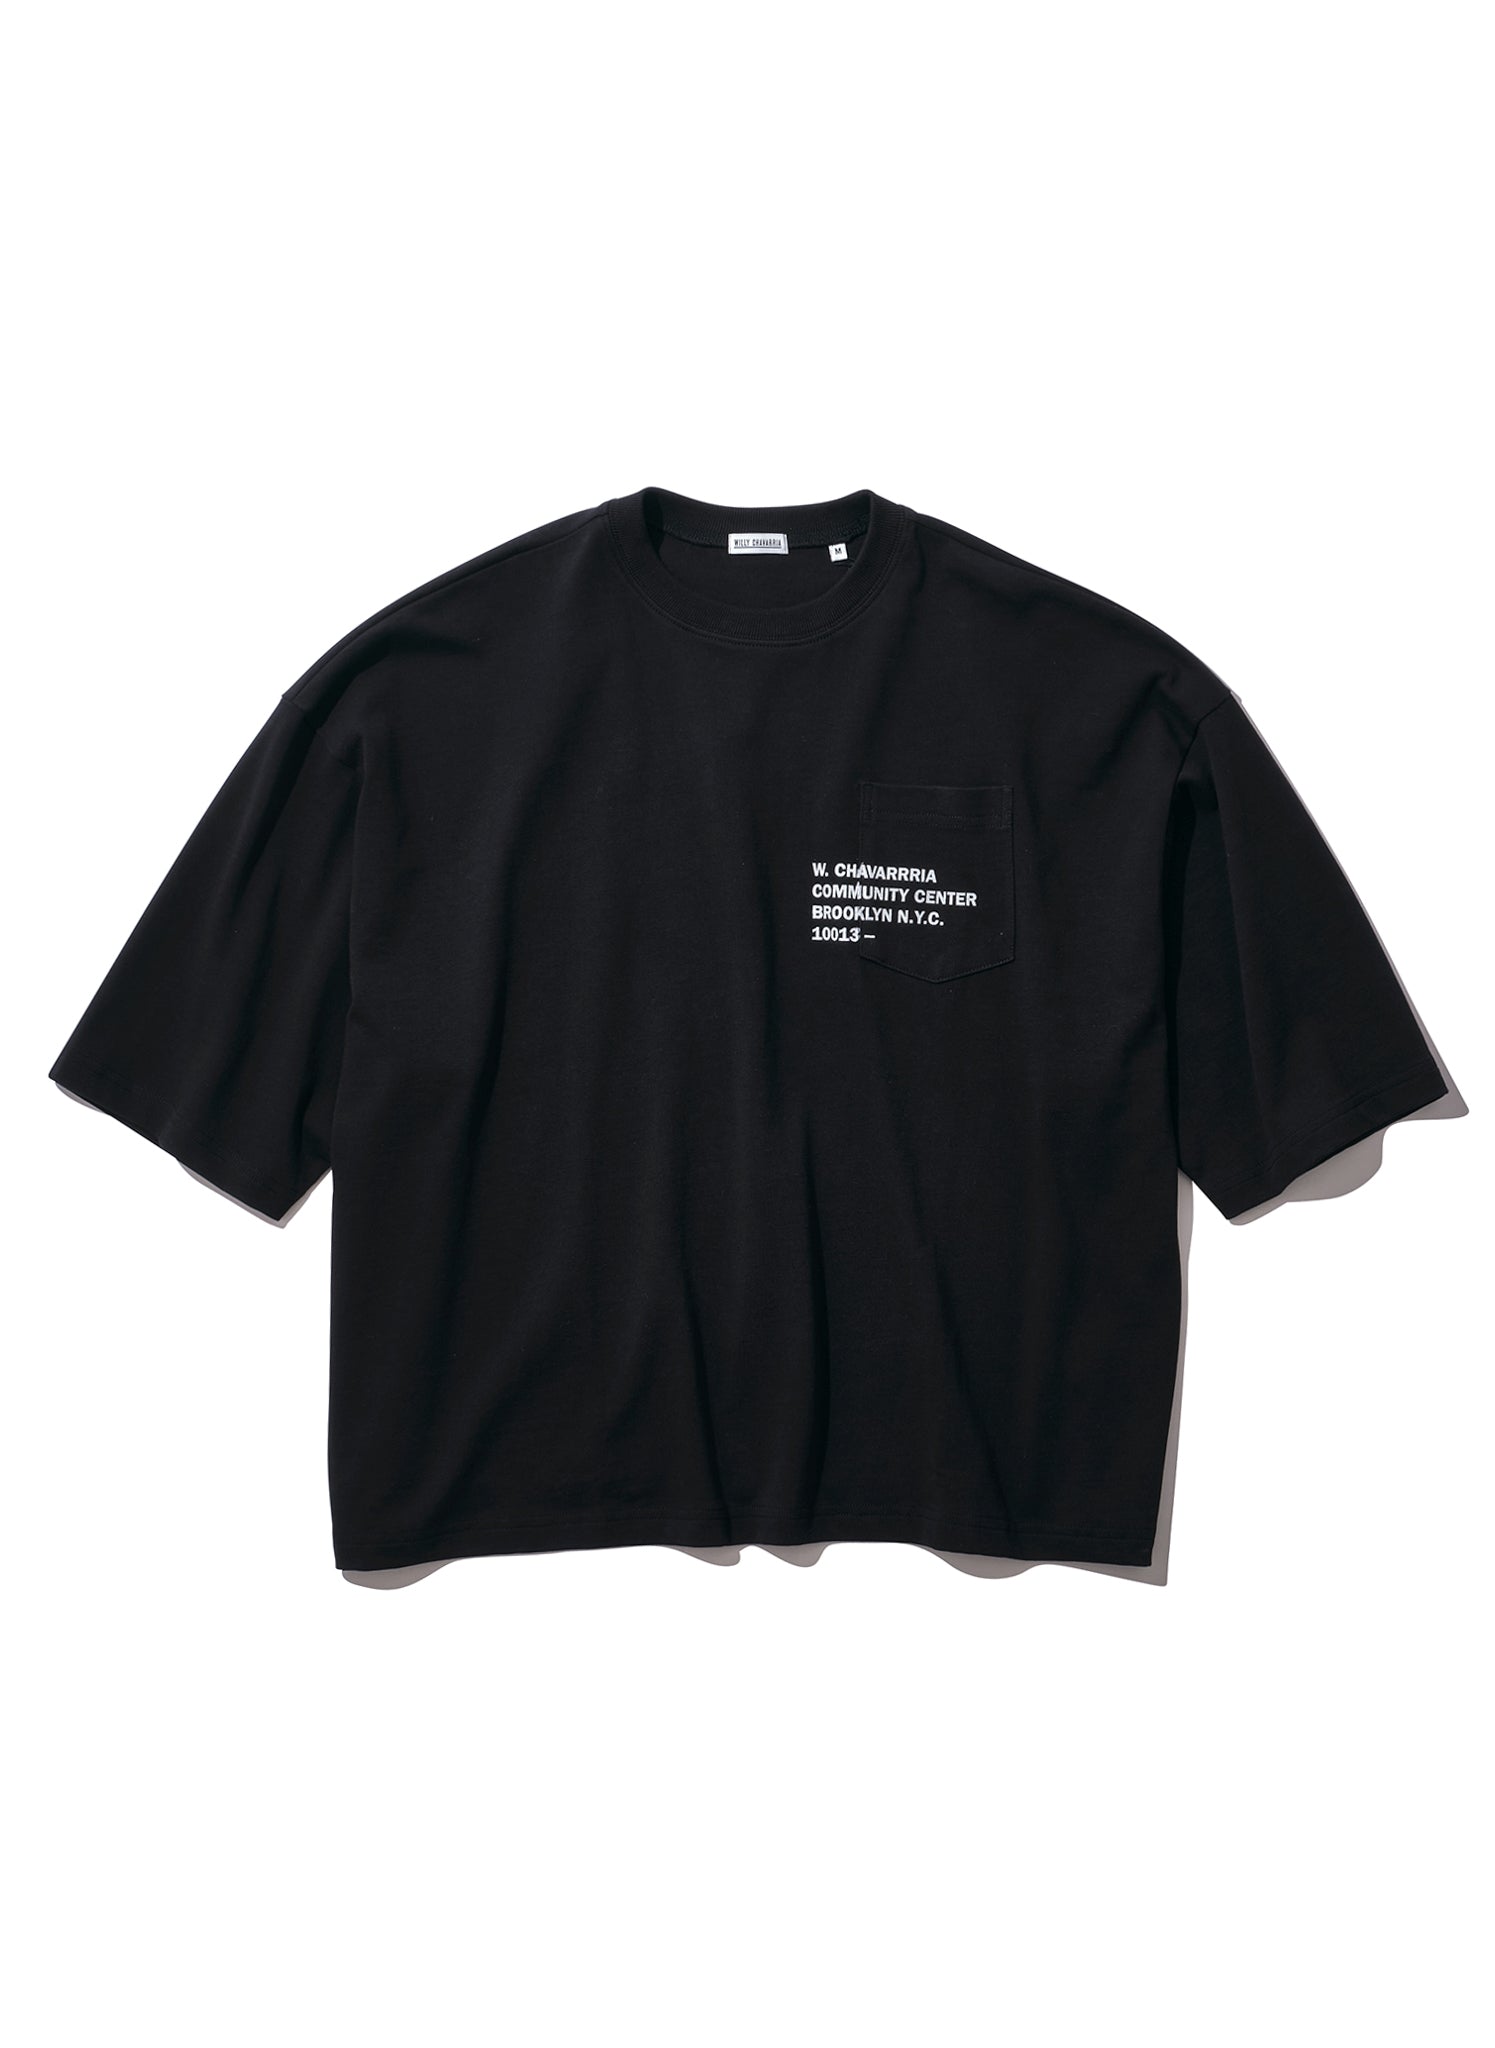 WILLY CHAVARRIA / CAR WASH T SOLID BLACK